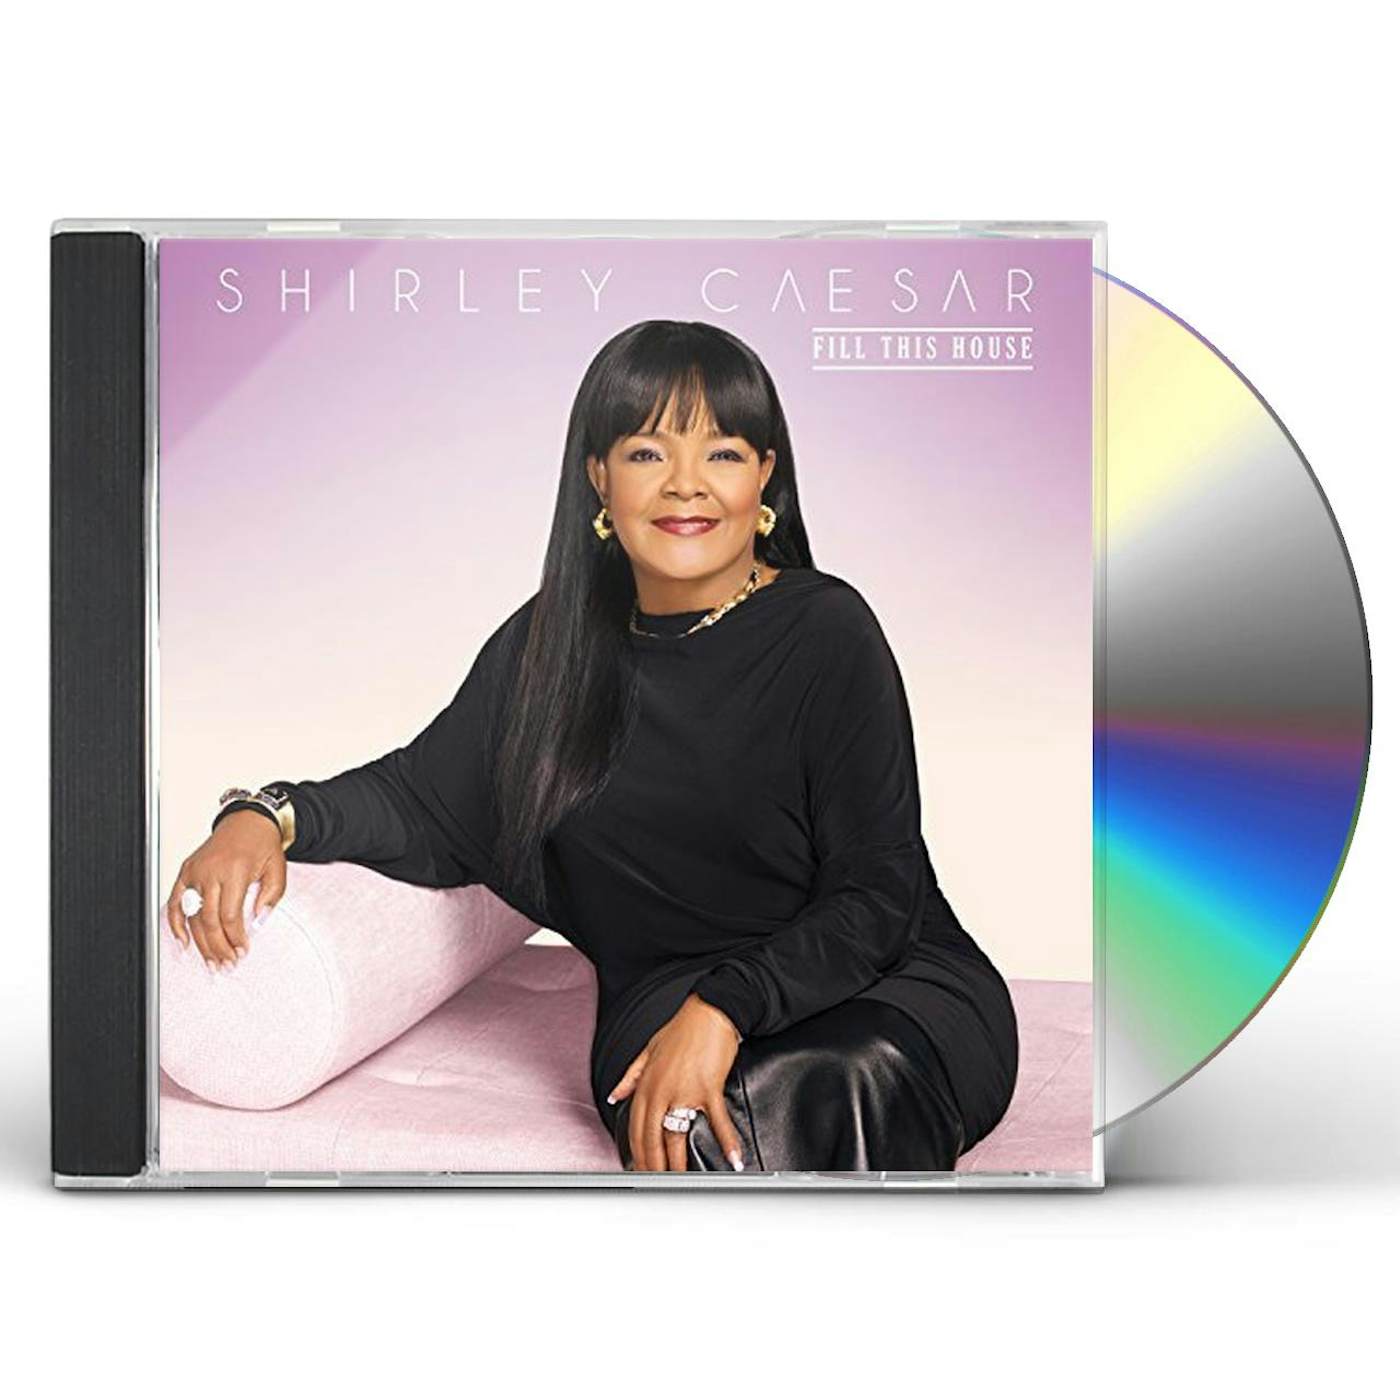 Shirley Caesar FILL THIS HOUSE CD